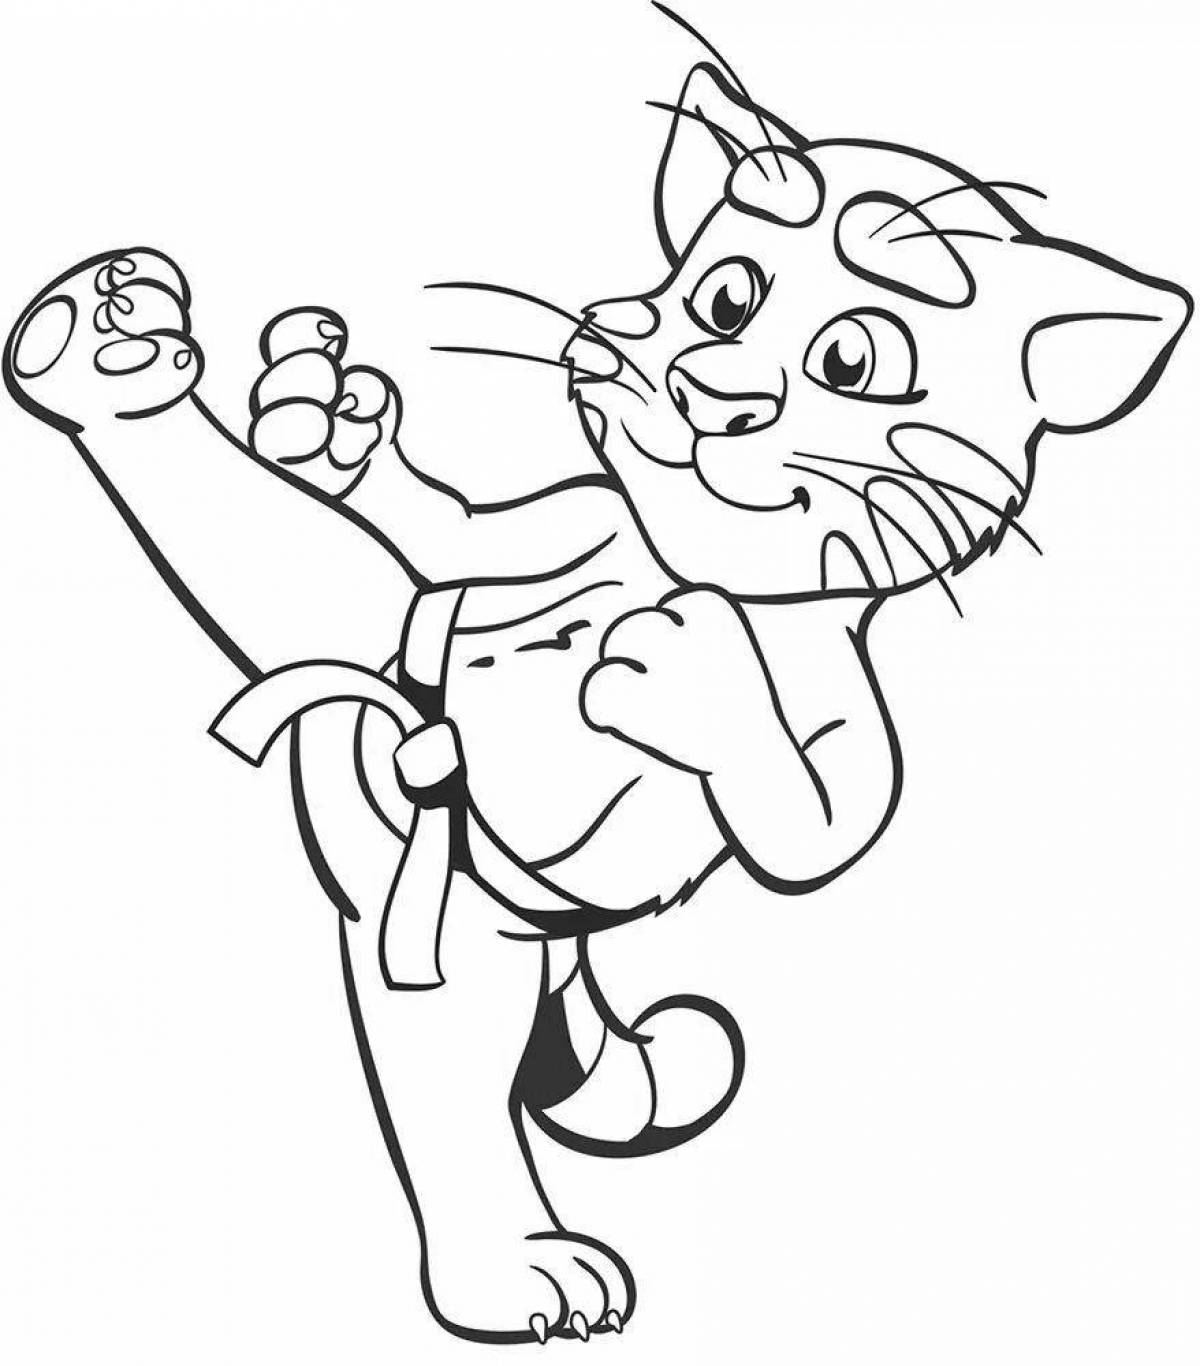 Charming tom and angela coloring pages for kids